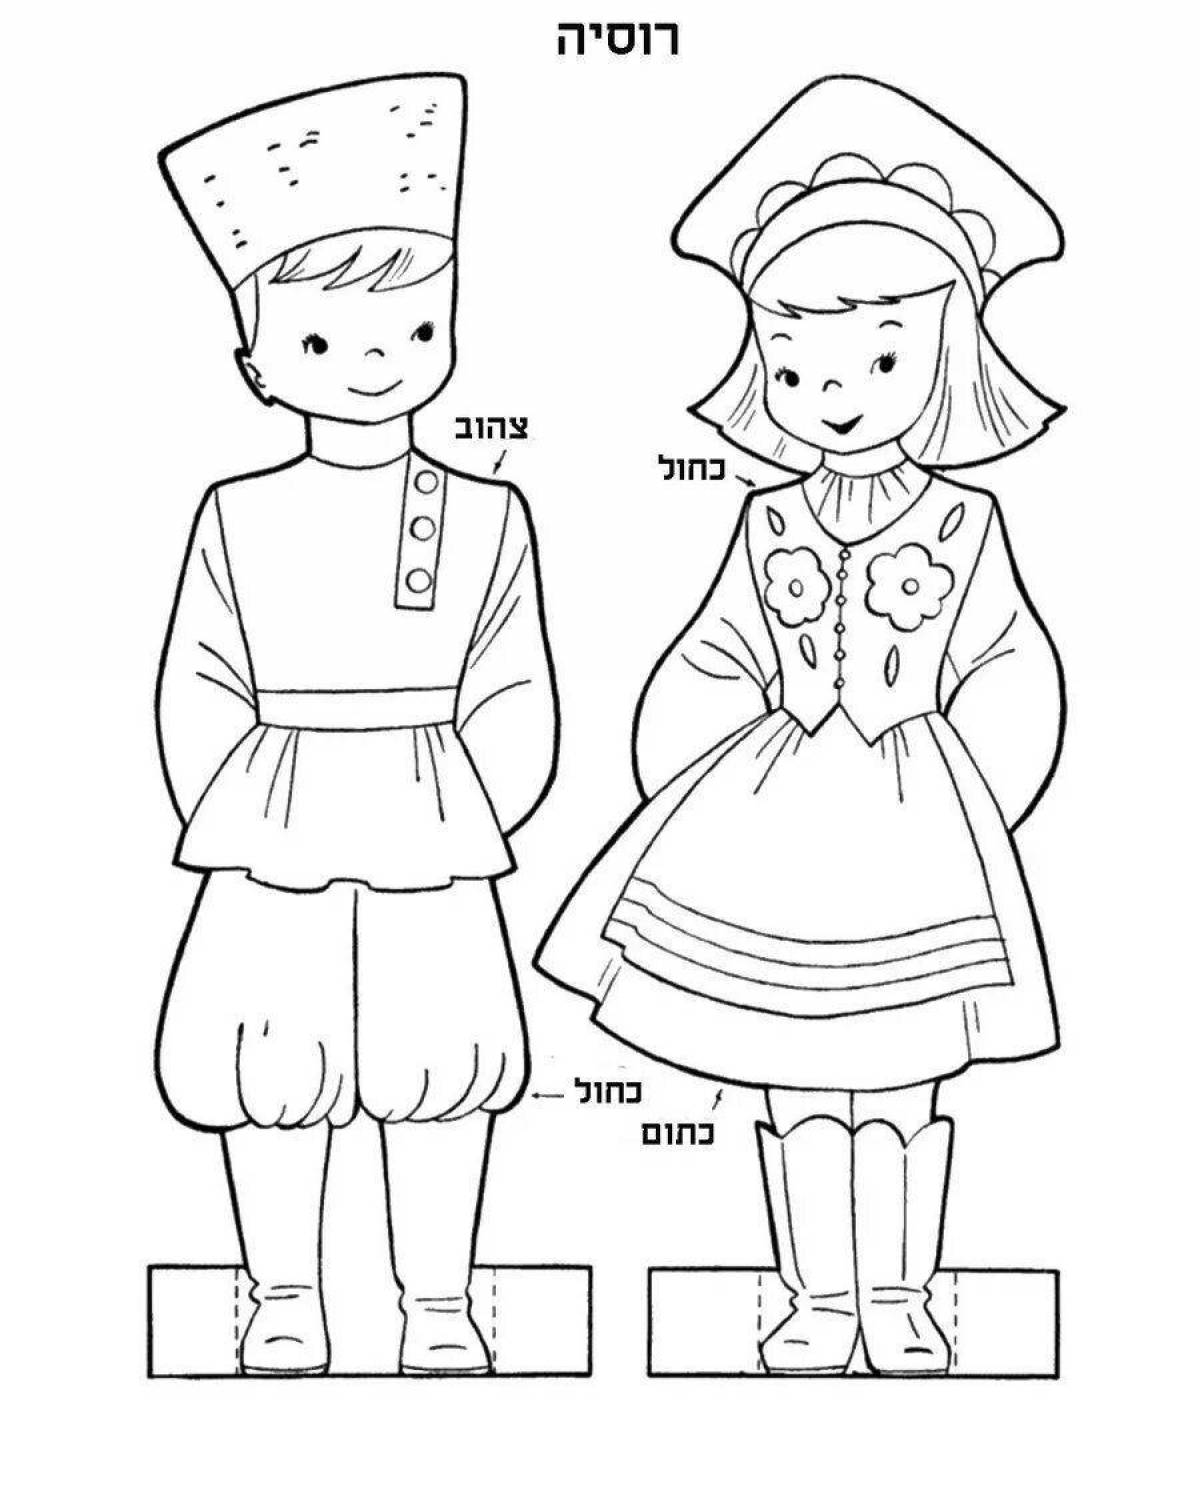 Exquisite folk costume coloring book for kids